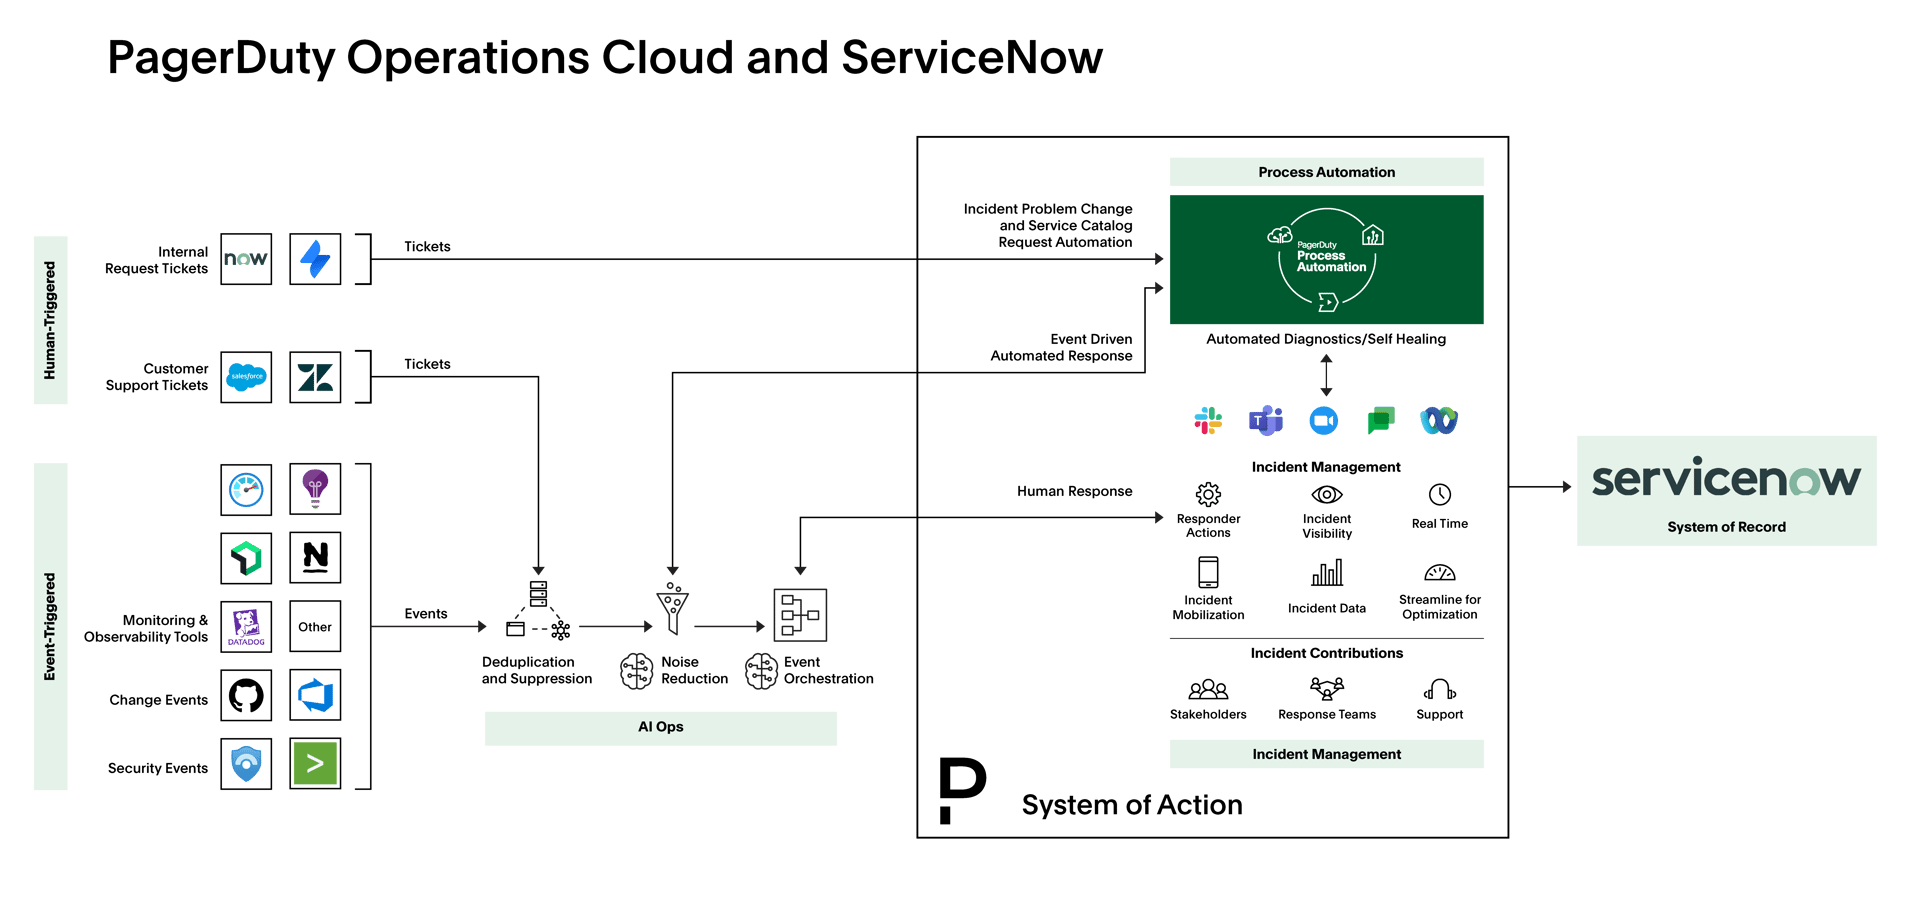 PagerDuty Operations Cloud and ServiceNow Architecture Diagram